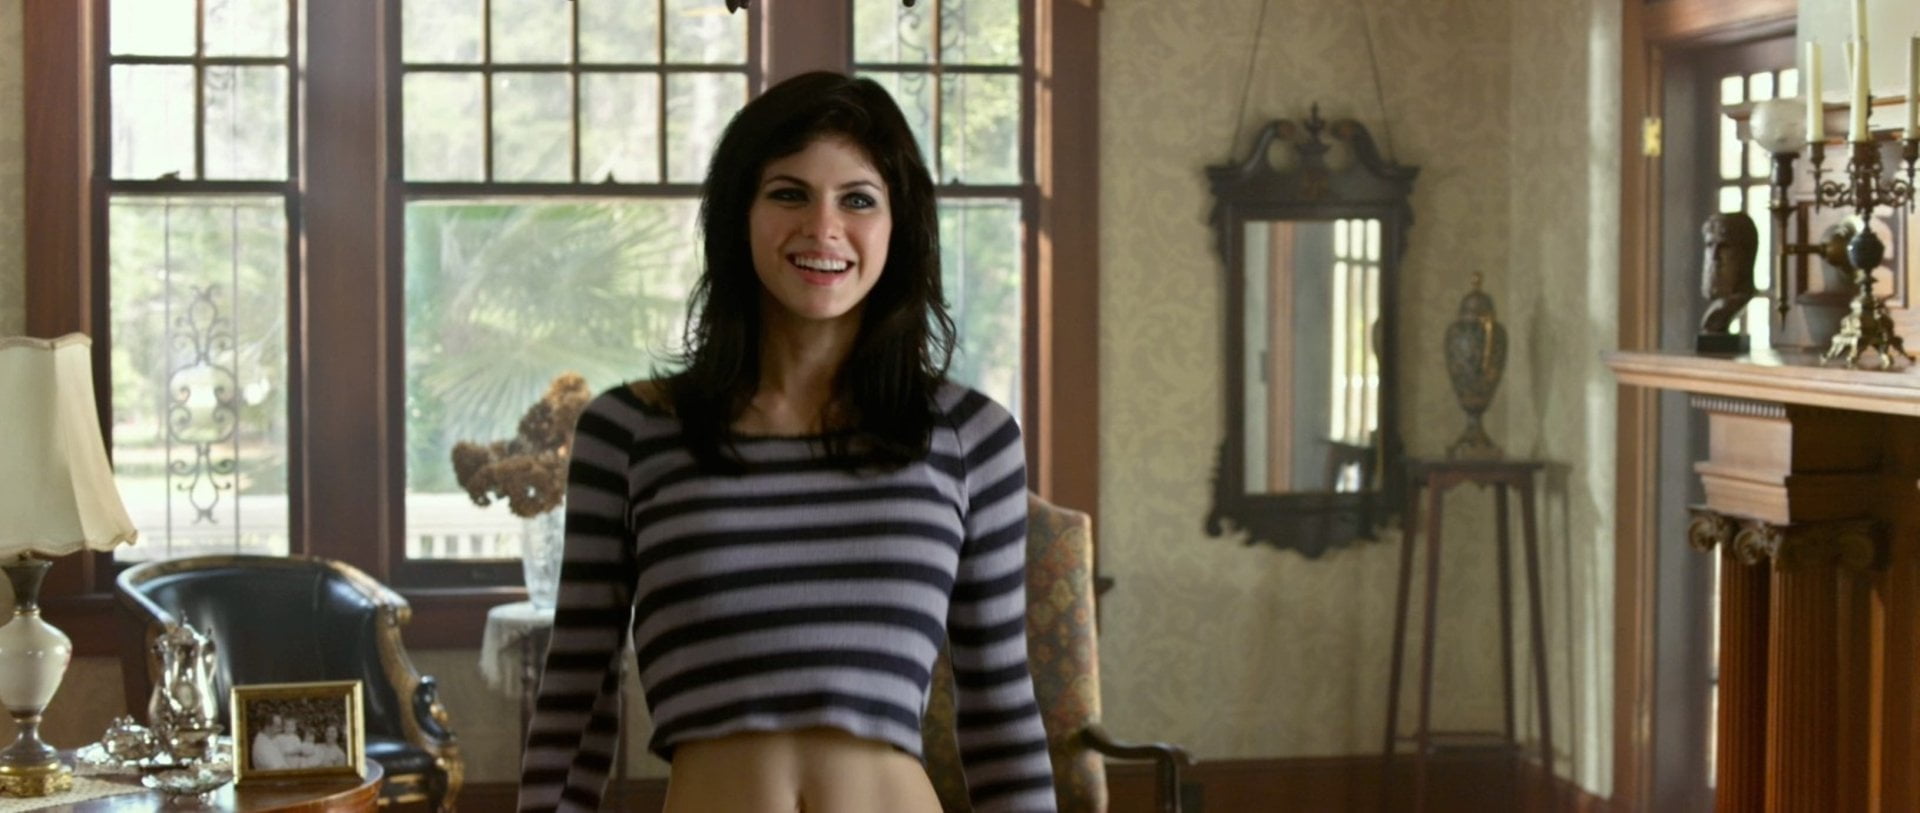 Movie, Texas Chainsaw 3D, Alexandra Daddario, smiling, indoors